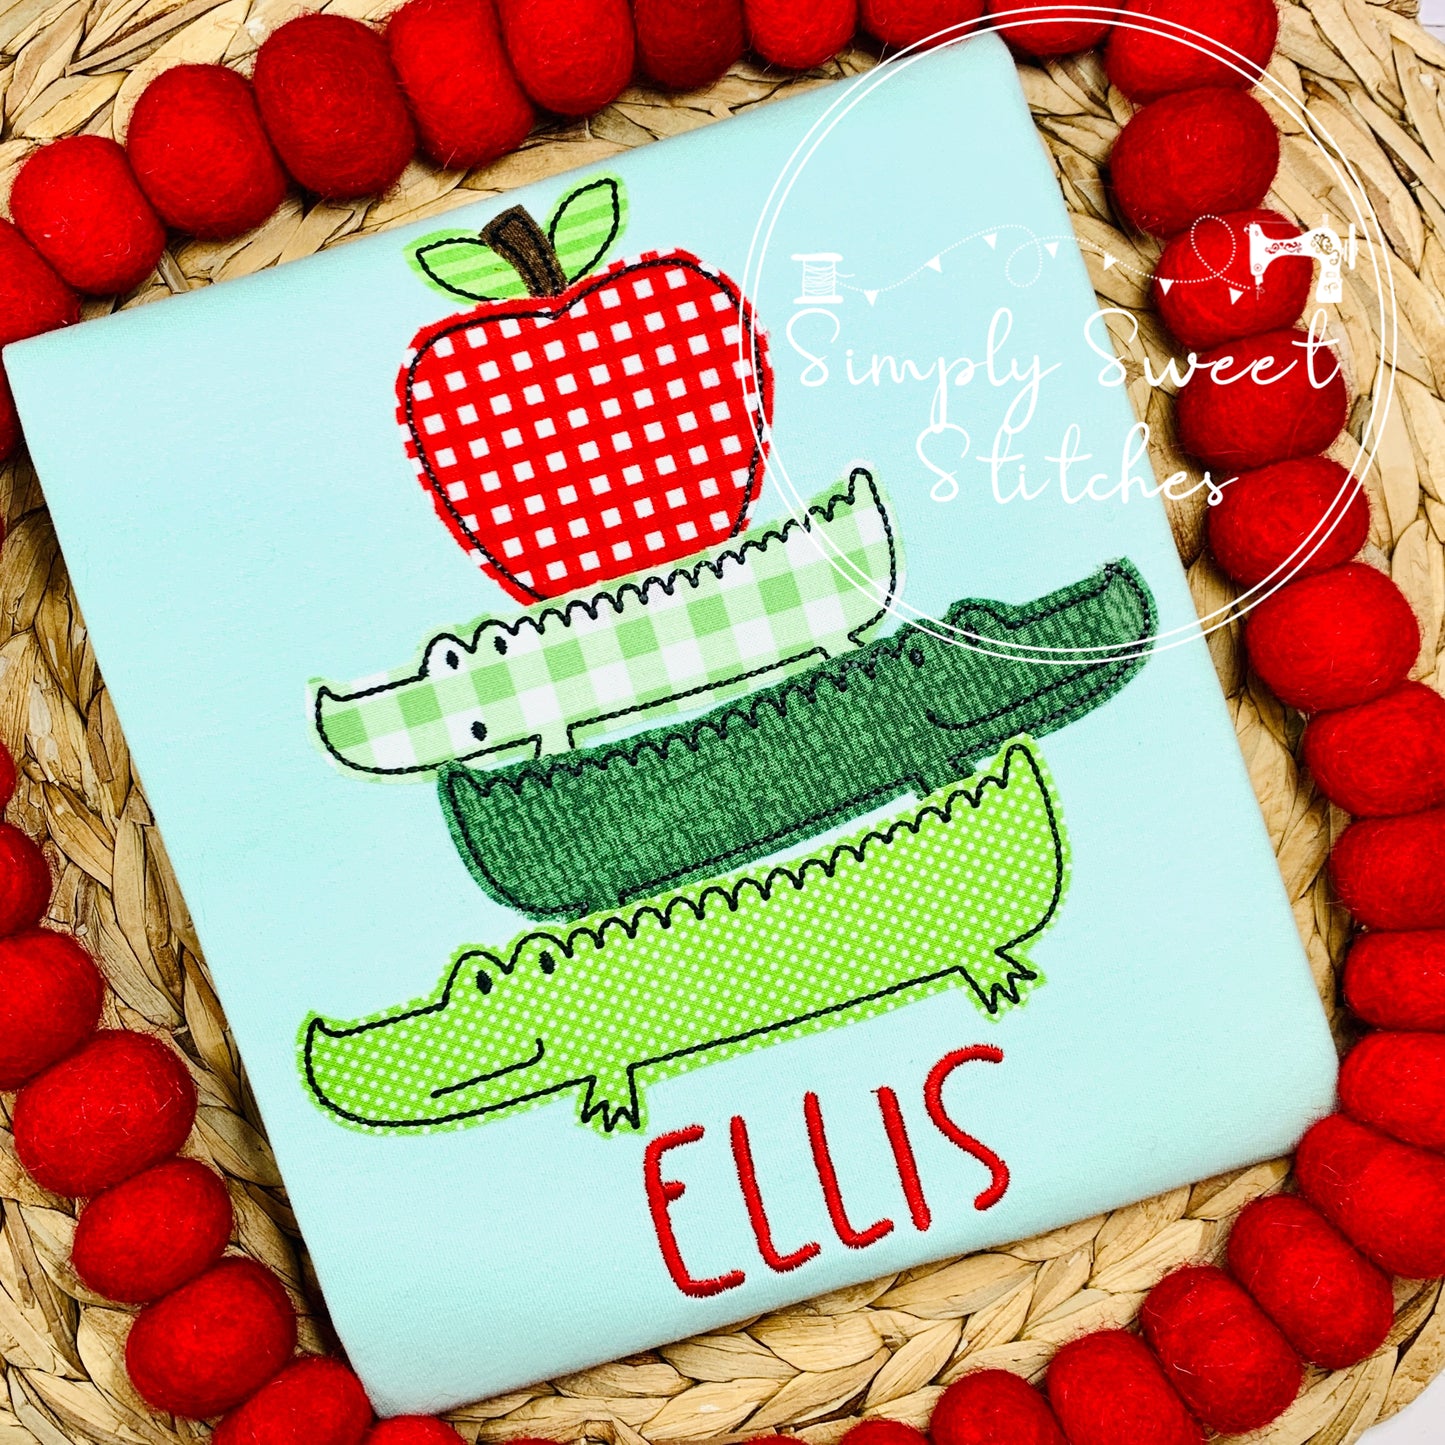 2348 - STACKED CROC WITH APPLE - APPLIQUE CHILD SHIRT